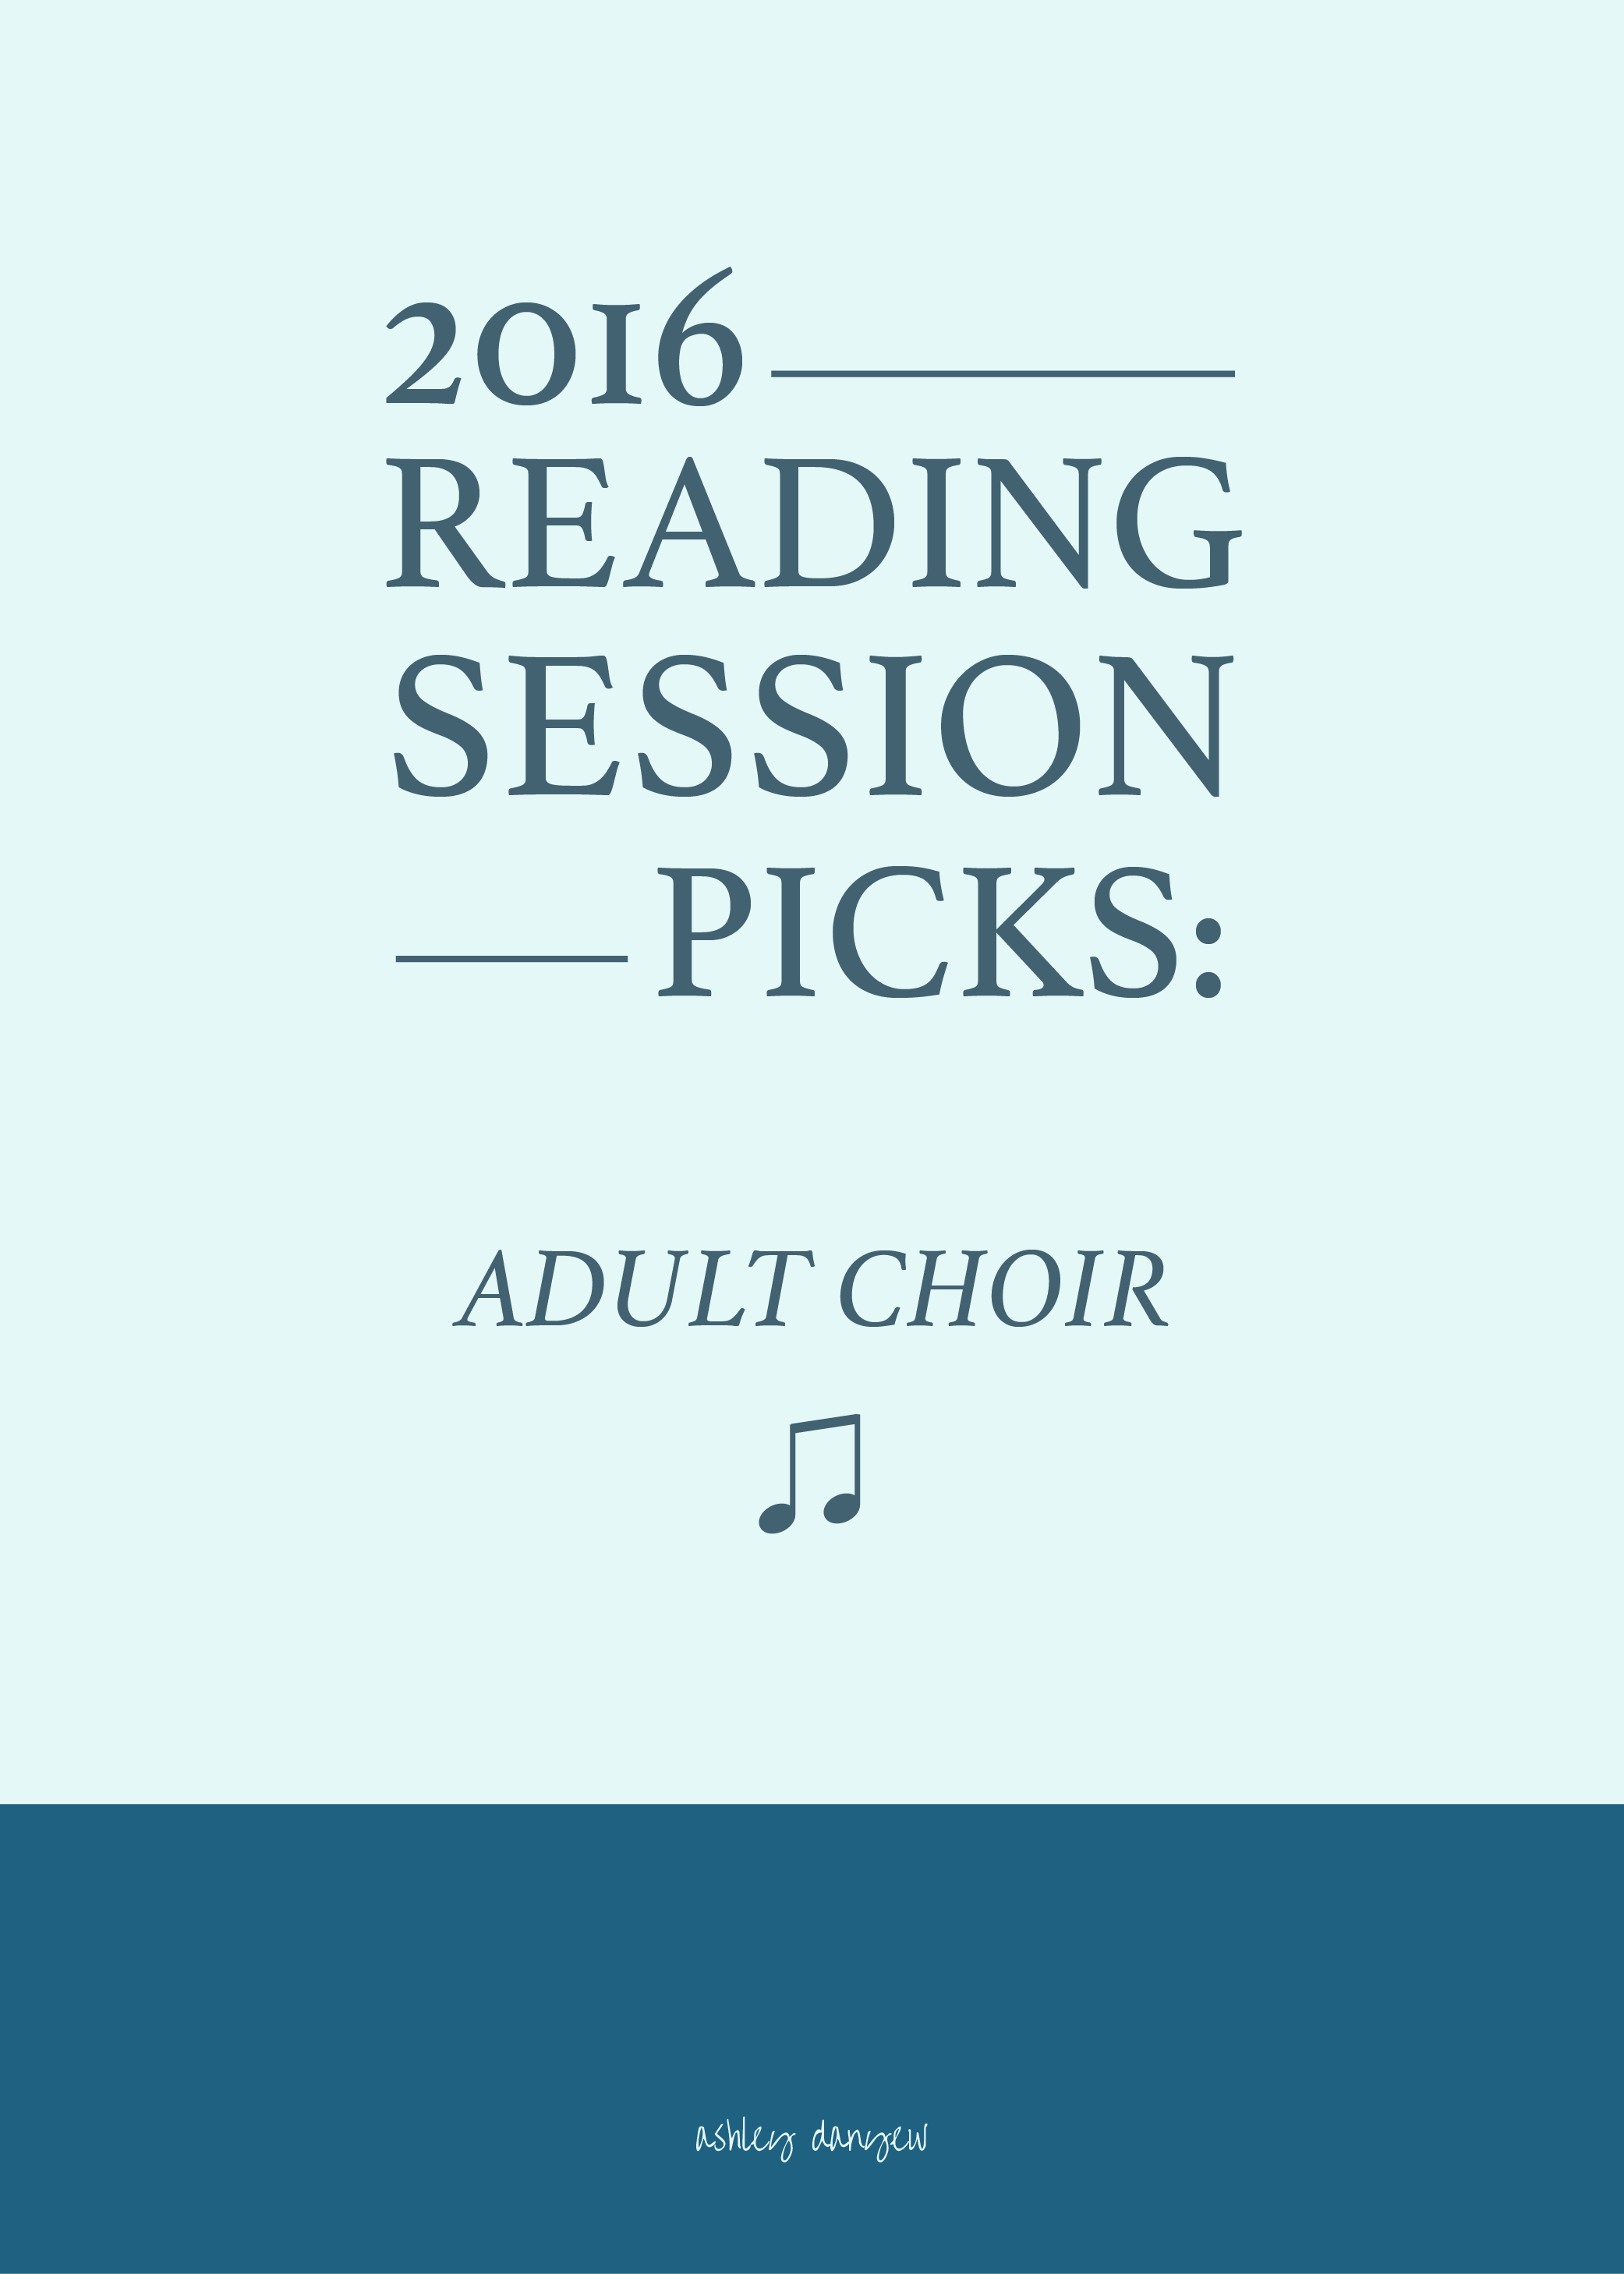 2016 Reading Session Picks - Adult Choir-01.png